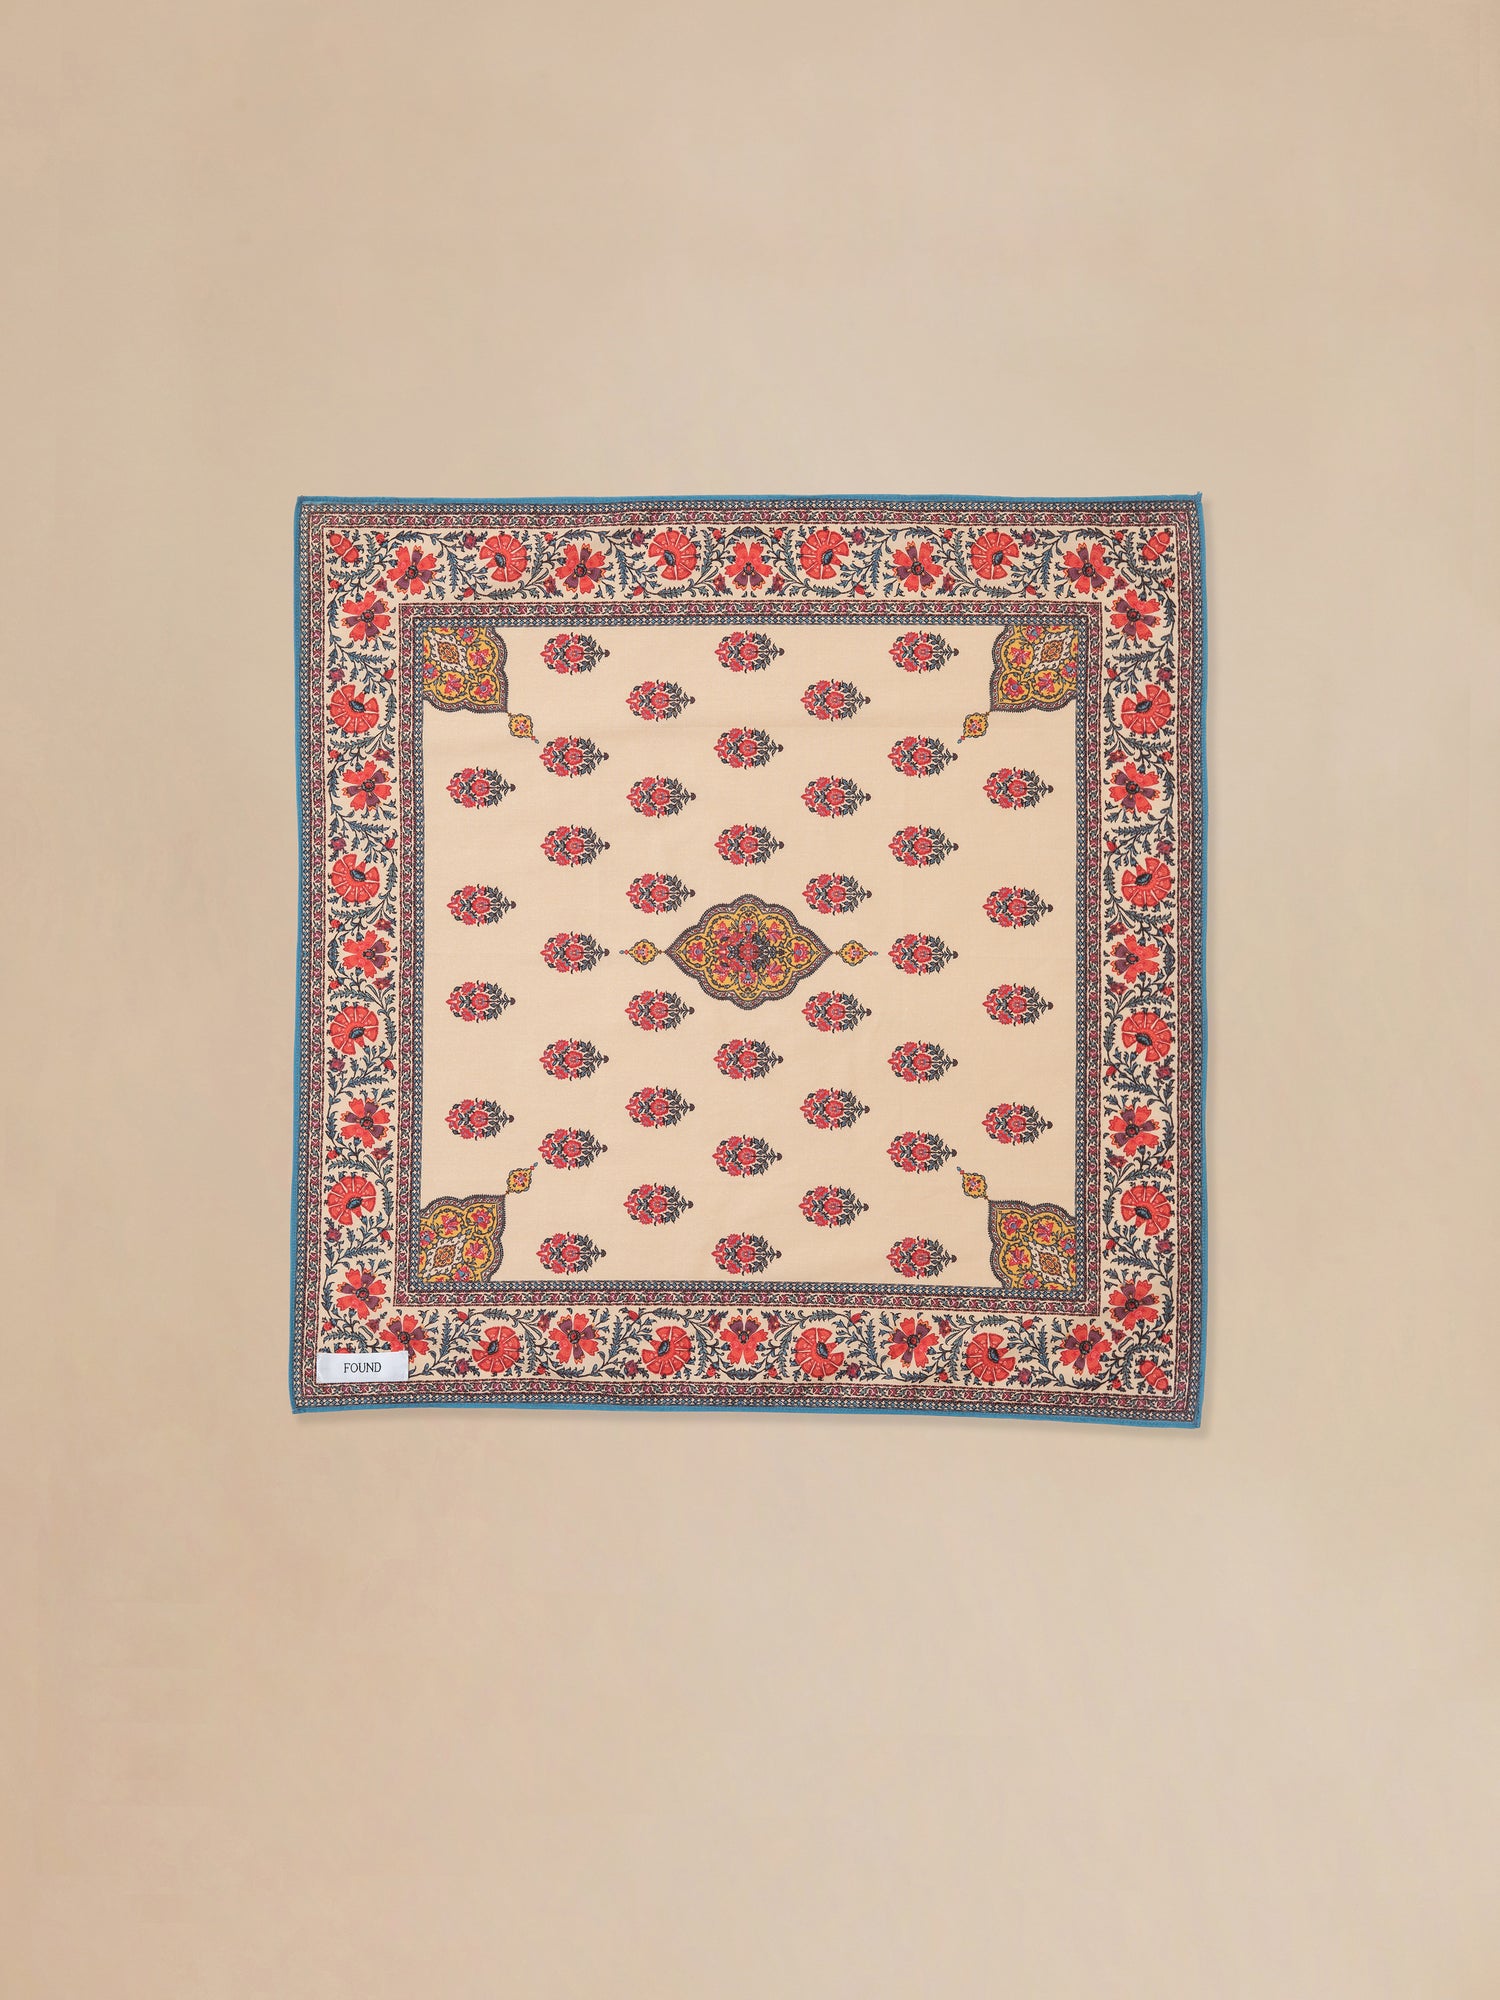 A beige and red Coming Soon | Poinciana Bandana rug with a floral pattern by Found.